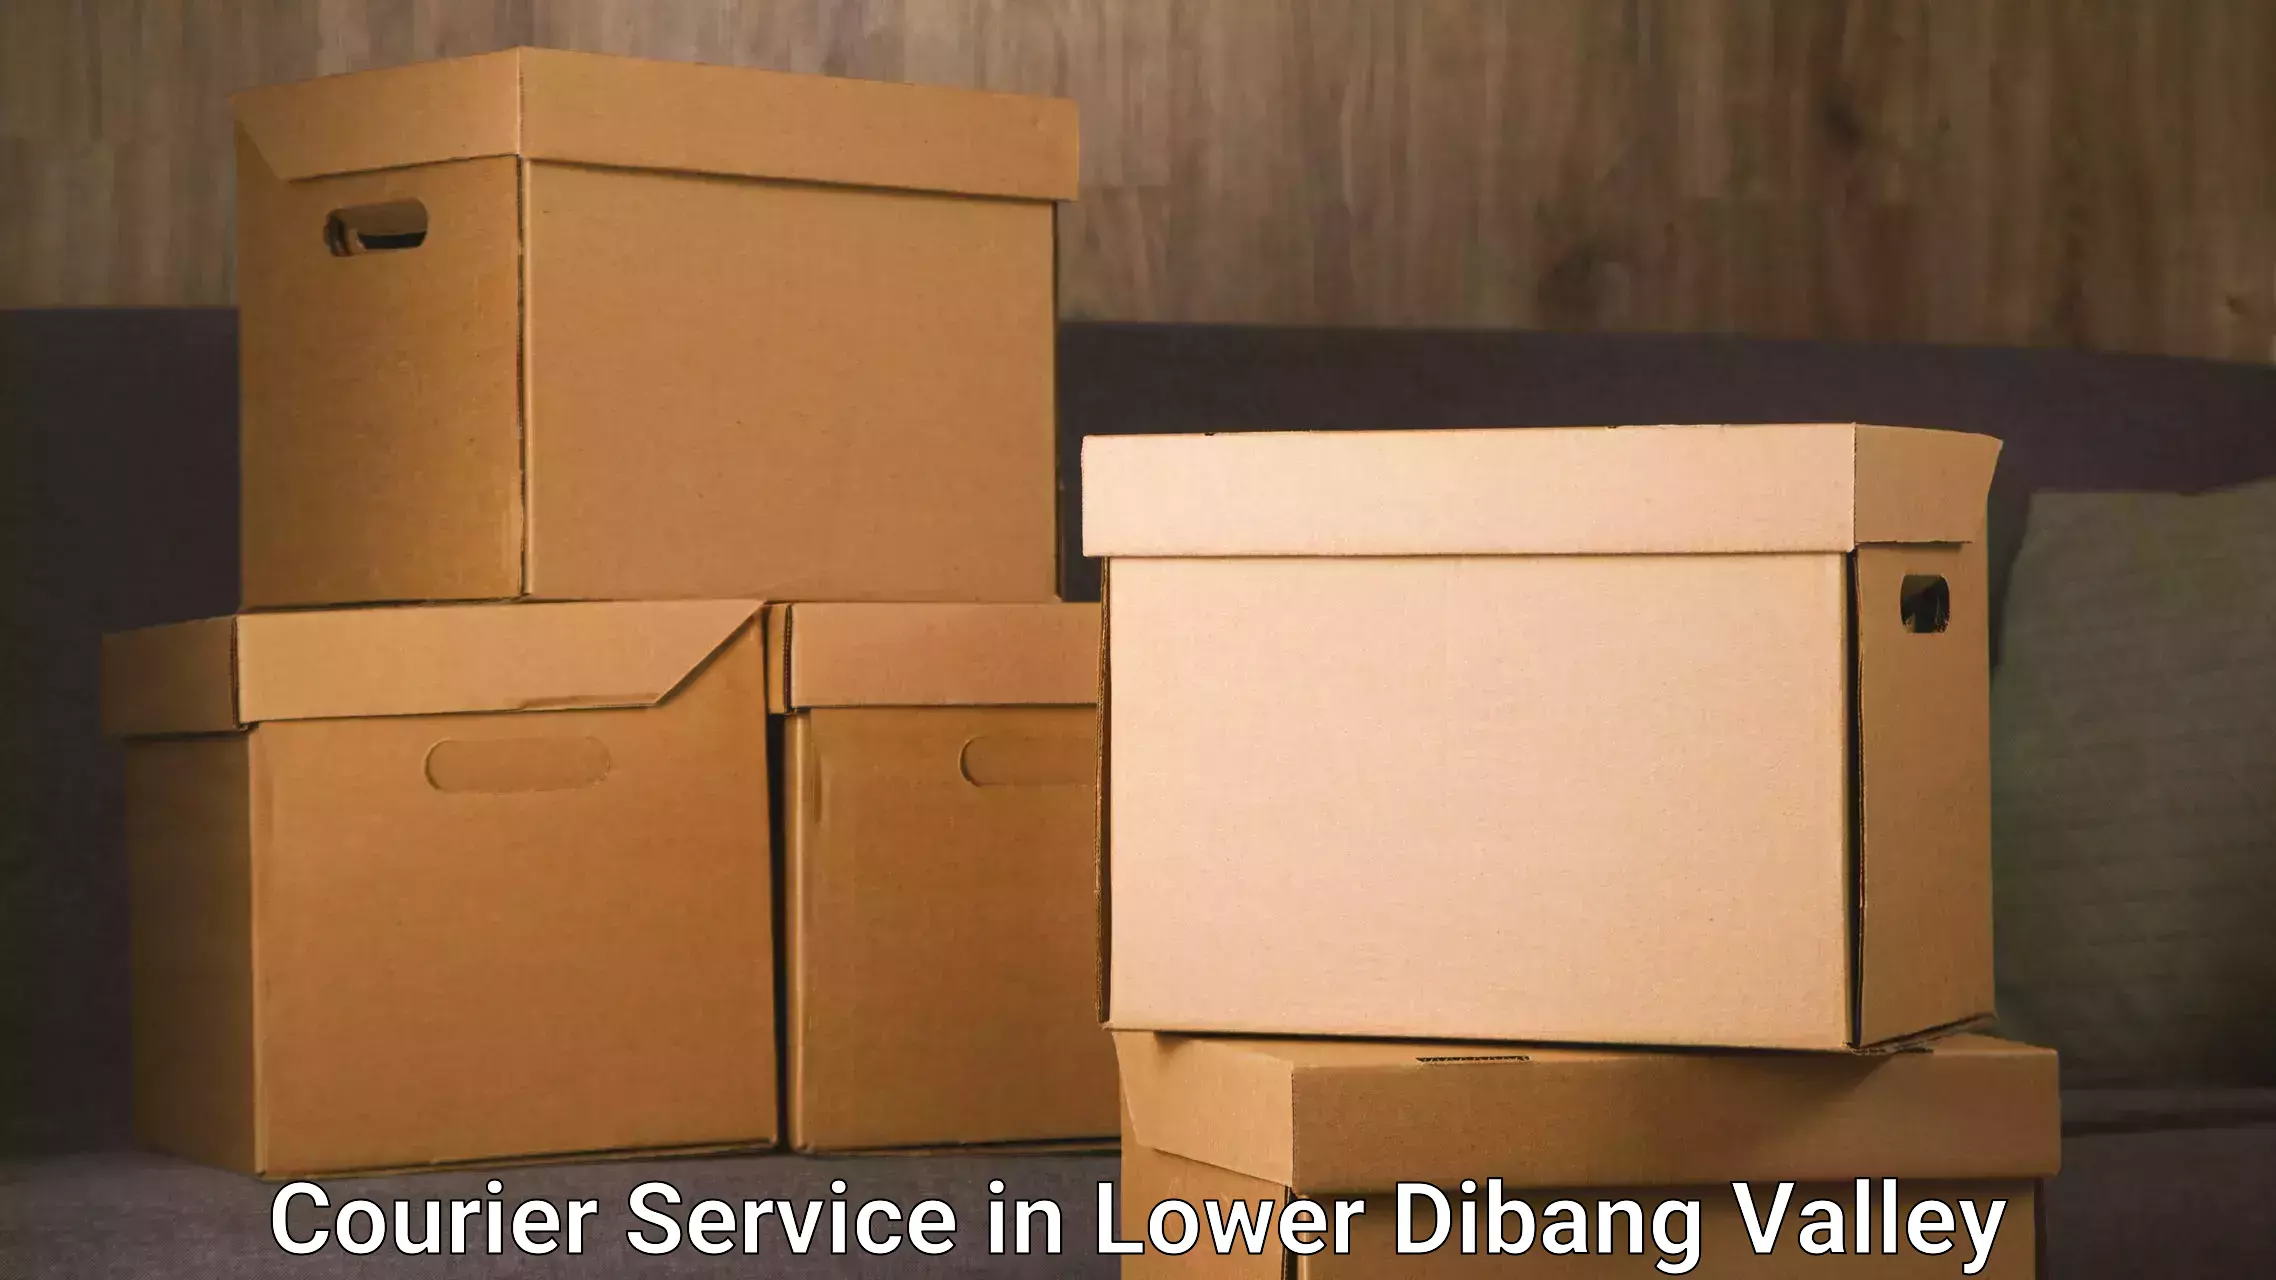 Nationwide parcel services in Lower Dibang Valley